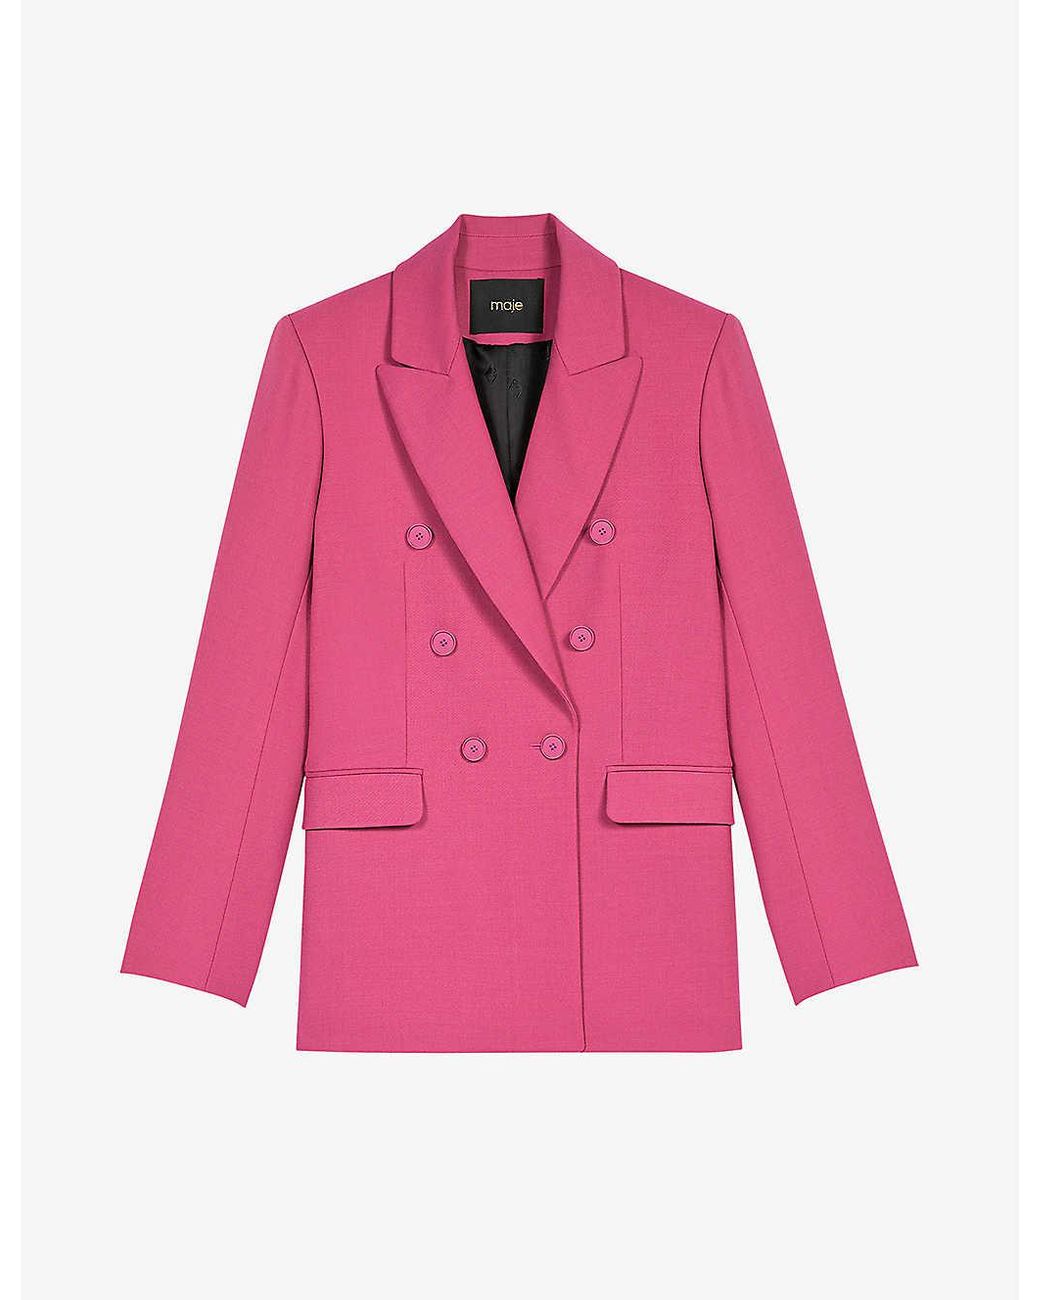 Maje Vibois Double-breasted Stretch-wool Blend Blazer in Pink | Lyst